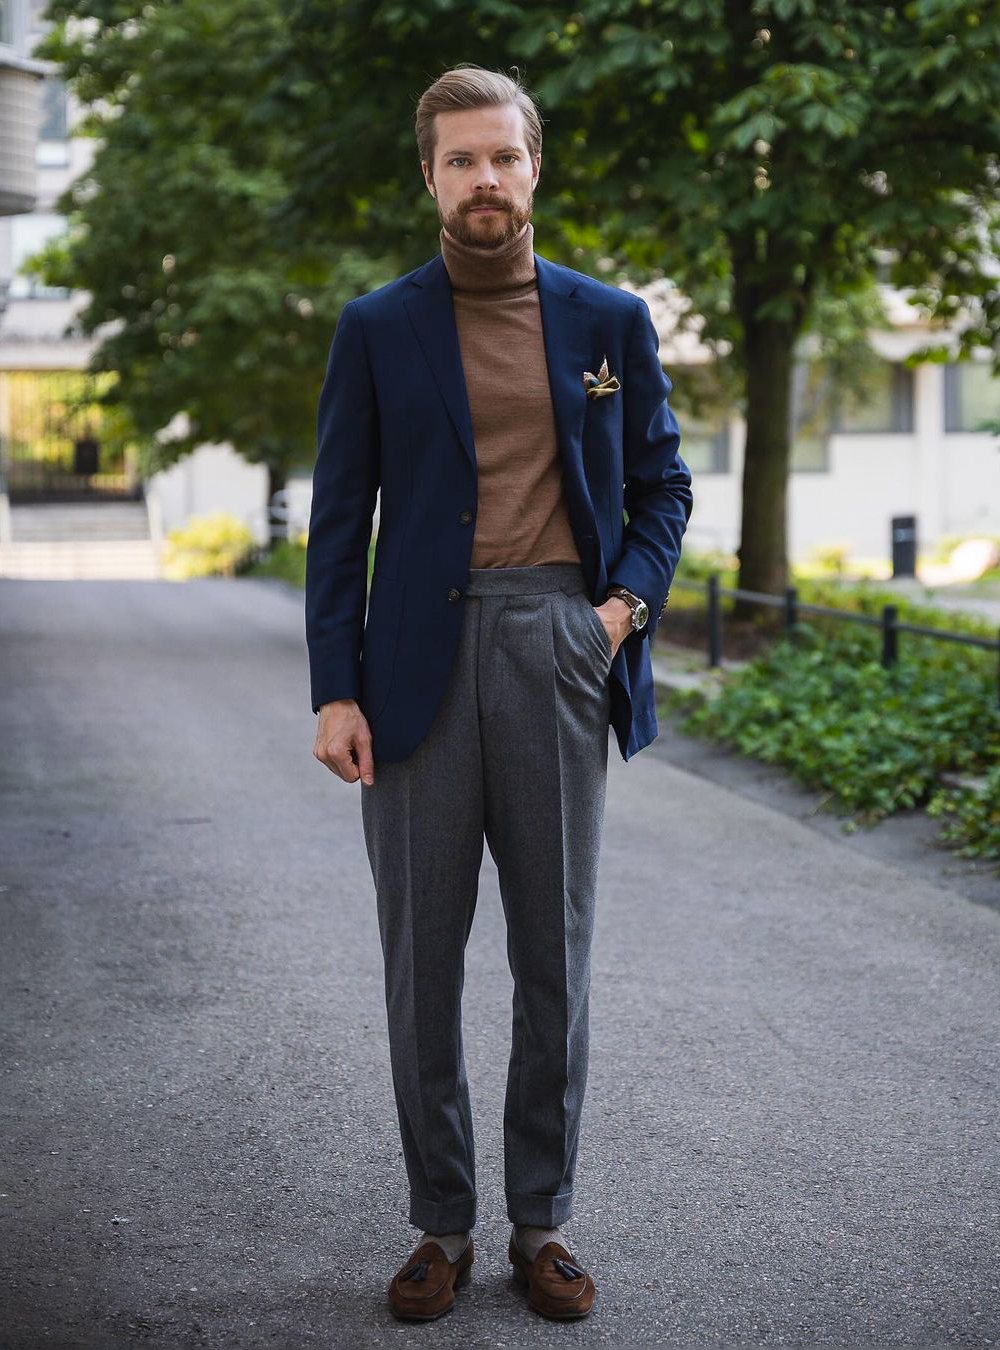 Navy blue blazer, brown turtleneck, grey pants, and brown loafers